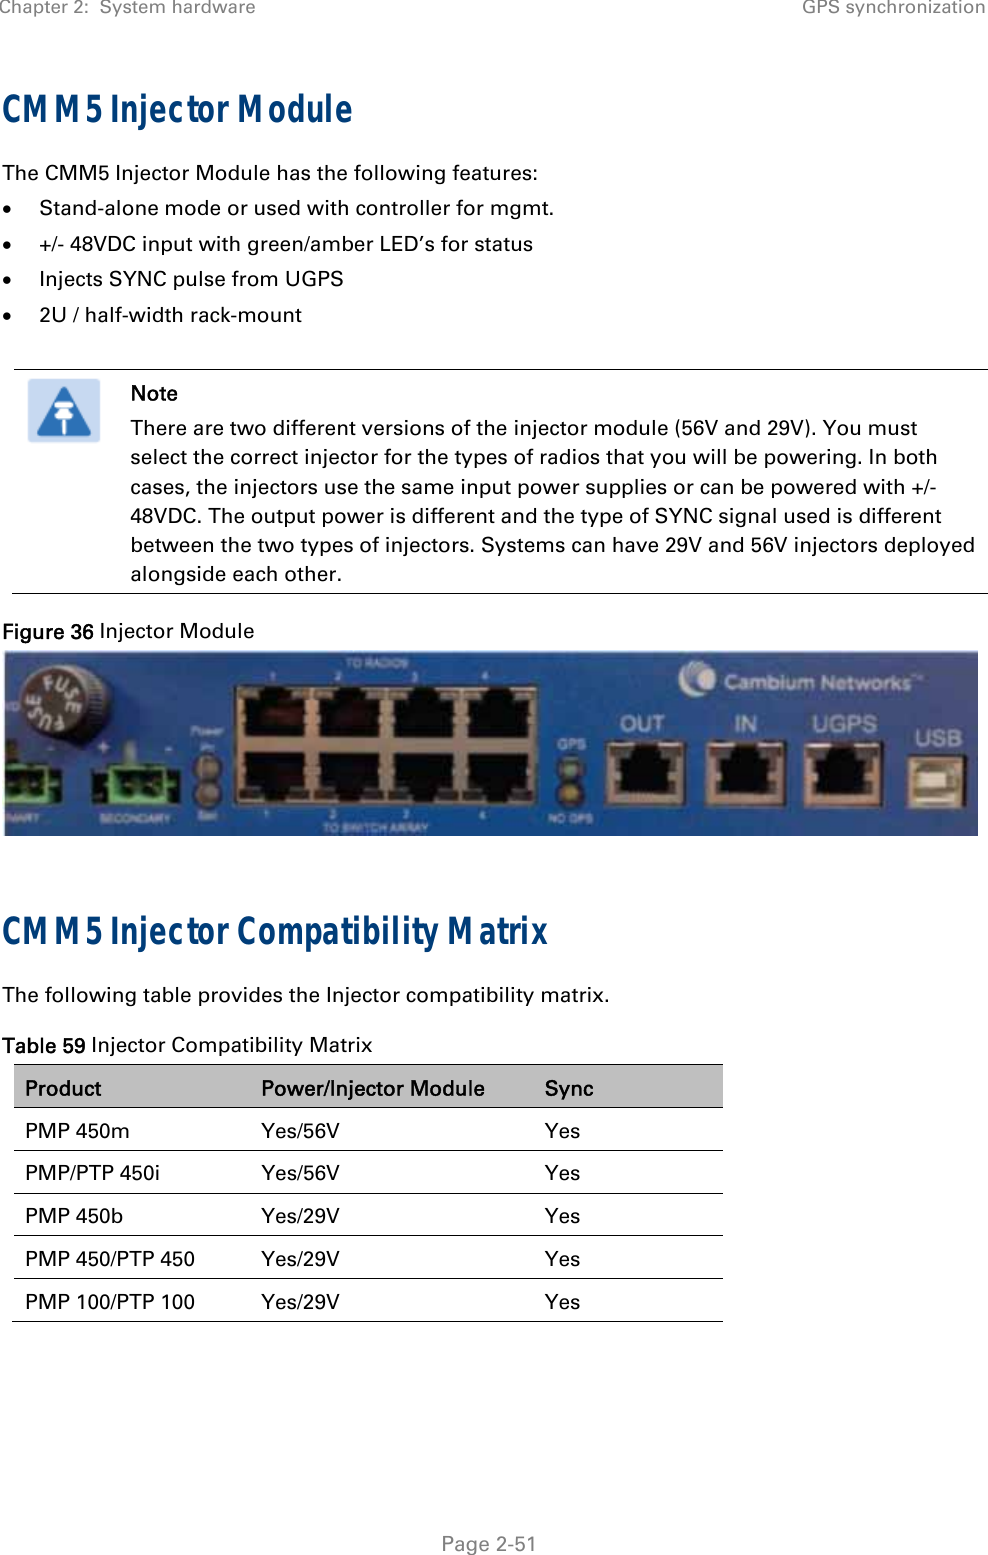 Chapter 2:  System hardware GPS synchronization   Page 2-51 CMM5 Injector Module The CMM5 Injector Module has the following features:  Stand-alone mode or used with controller for mgmt.  +/- 48VDC input with green/amber LED’s for status  Injects SYNC pulse from UGPS  2U / half-width rack-mount   Note There are two different versions of the injector module (56V and 29V). You must select the correct injector for the types of radios that you will be powering. In both cases, the injectors use the same input power supplies or can be powered with +/- 48VDC. The output power is different and the type of SYNC signal used is different between the two types of injectors. Systems can have 29V and 56V injectors deployed alongside each other. Figure 36 Injector Module   CMM5 Injector Compatibility Matrix The following table provides the Injector compatibility matrix. Table 59 Injector Compatibility Matrix Product  Power/Injector Module  Sync PMP 450m  Yes/56V  Yes PMP/PTP 450i  Yes/56V  Yes PMP 450b  Yes/29V  Yes PMP 450/PTP 450  Yes/29V  Yes PMP 100/PTP 100  Yes/29V  Yes  